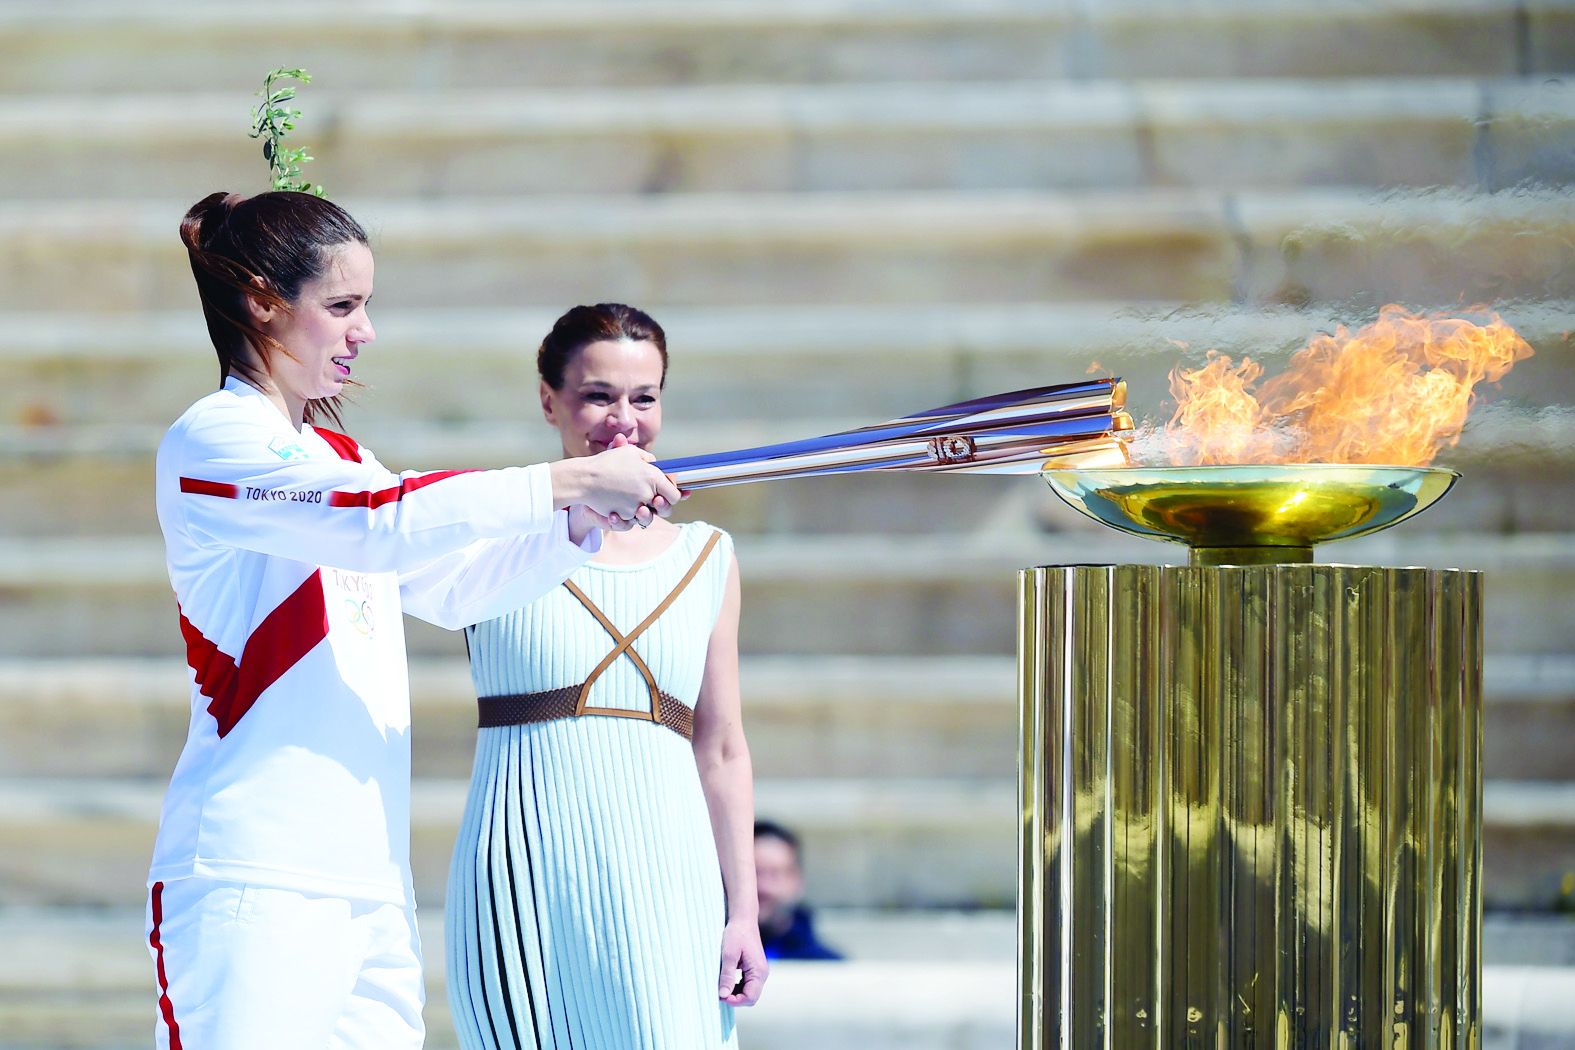 An athlete lights the Olympic torch during the olympic flame handover ceremony for the 2020 Tokyo Summer Olympics, on March 19, 2020 in Athens. (Photo by ARIS MESSINIS / various sources / AFP)